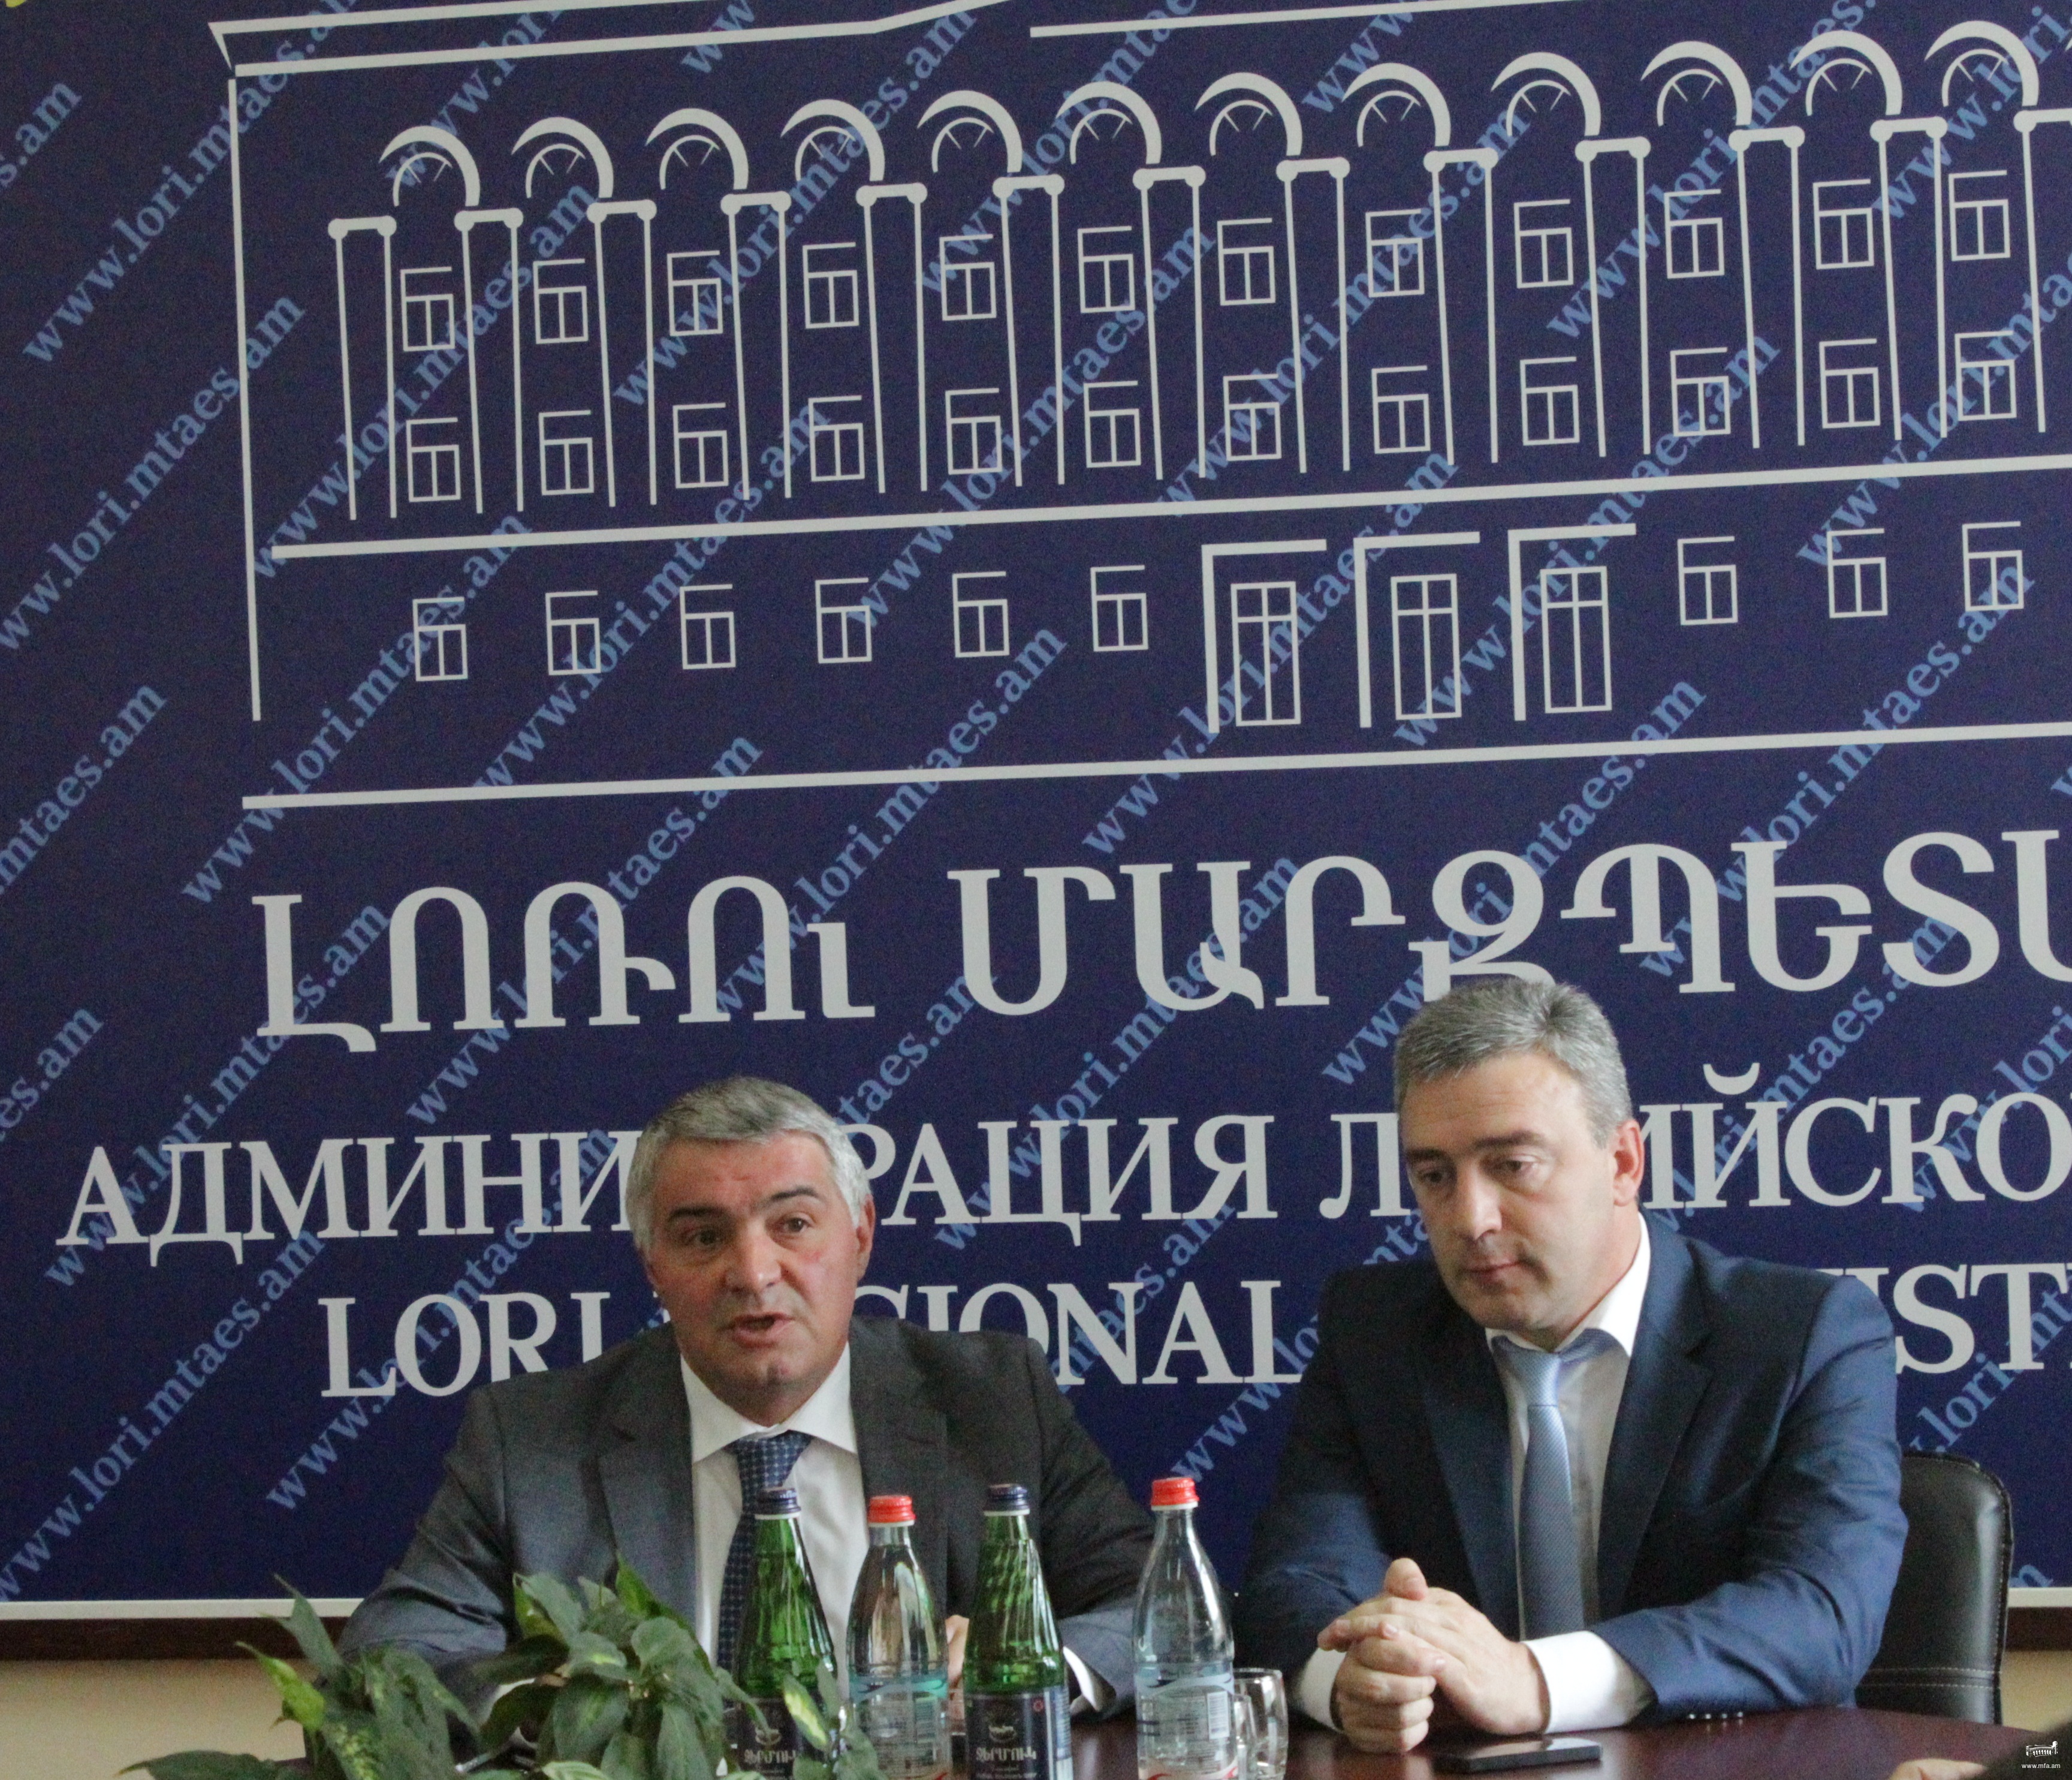 Working Visit of Deputy Foreign Minister Hovakimian to Lori Marz